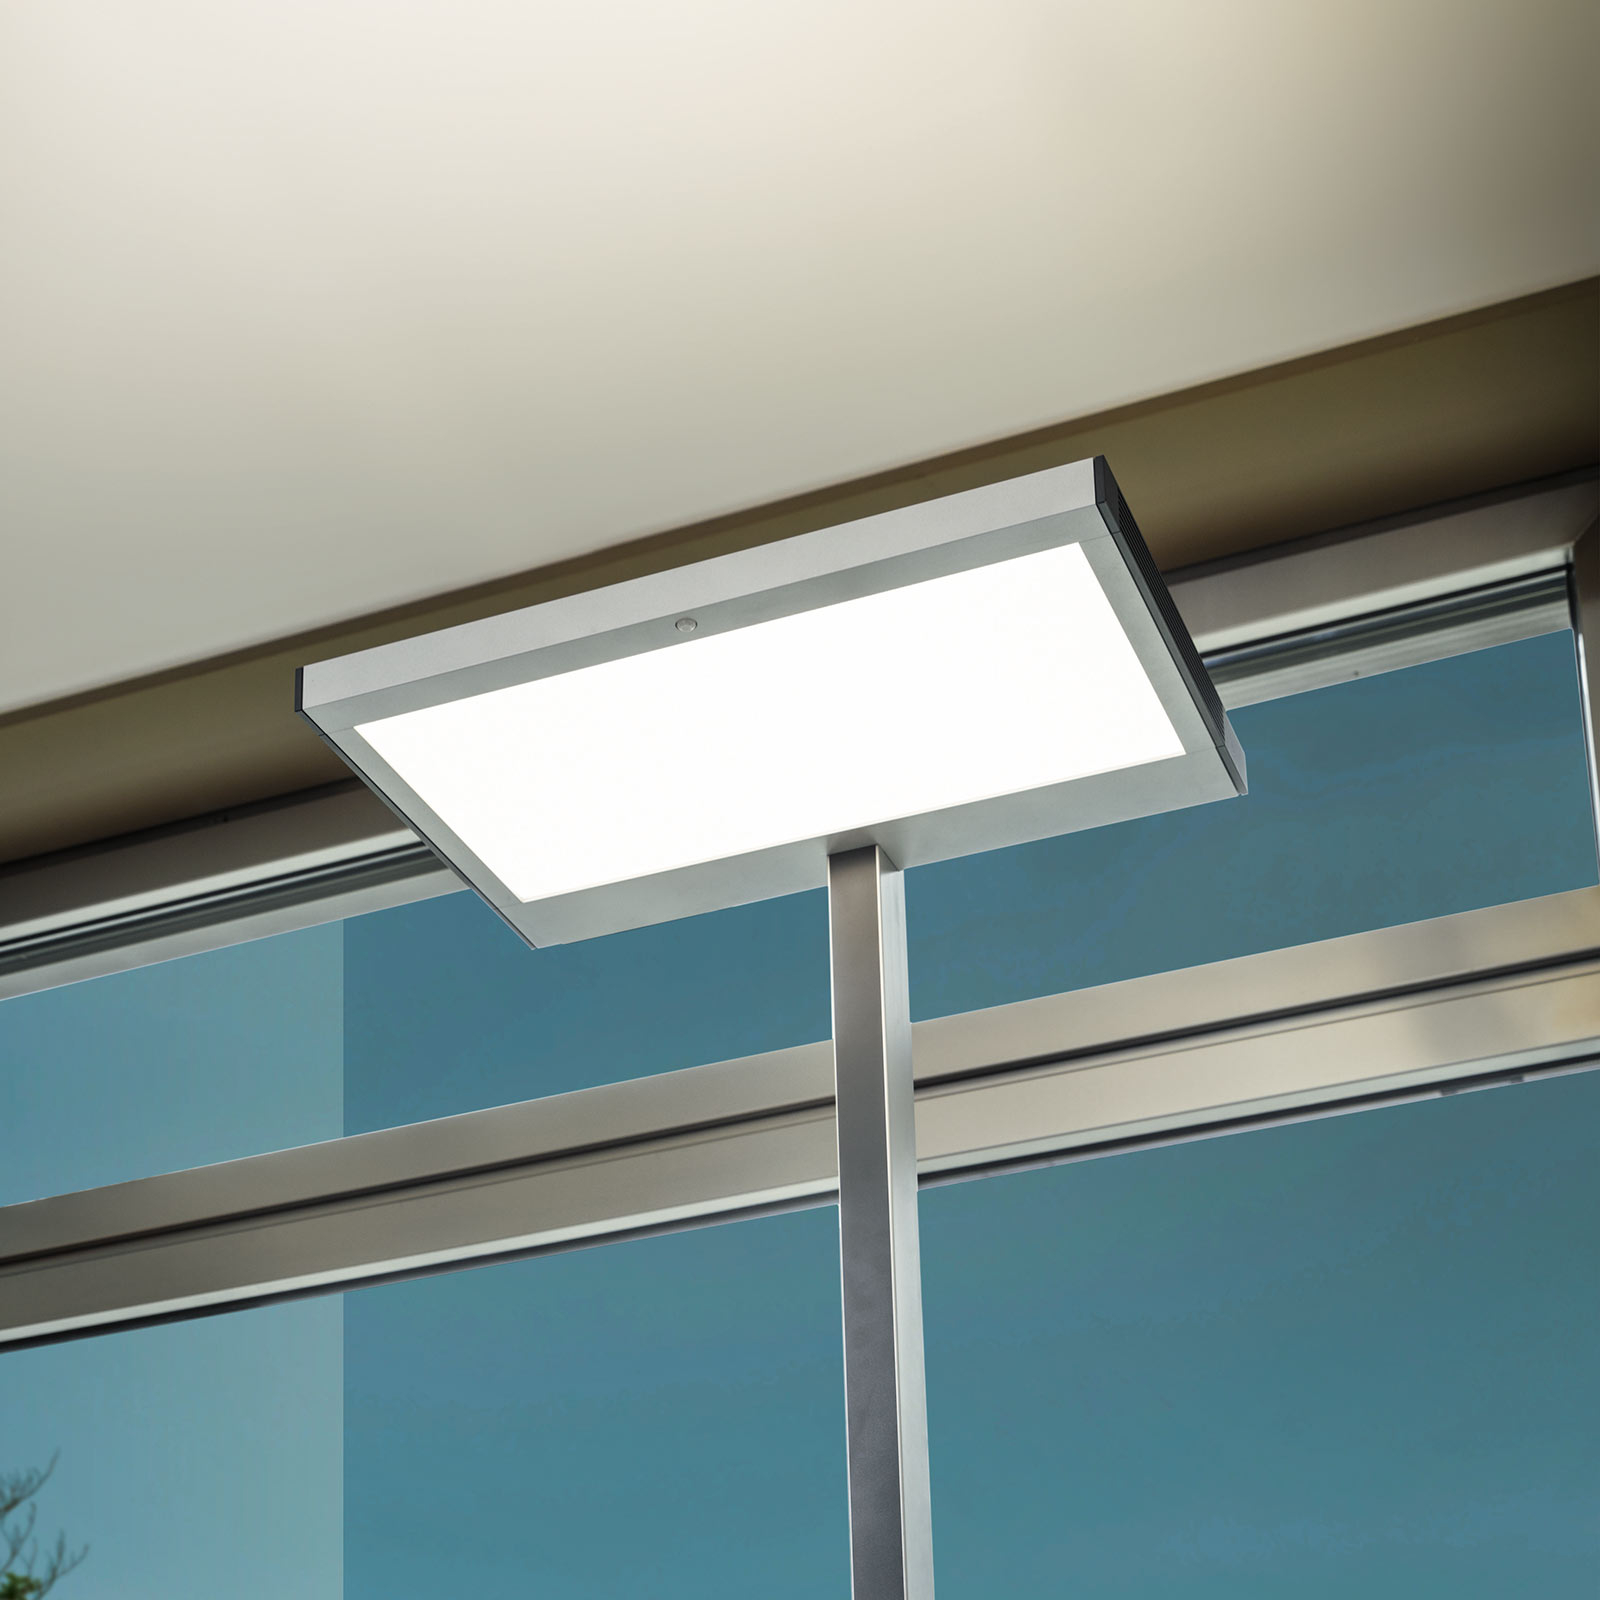 Luctra Vitawork LED-Bürostehlampe 7000lm dimmbar